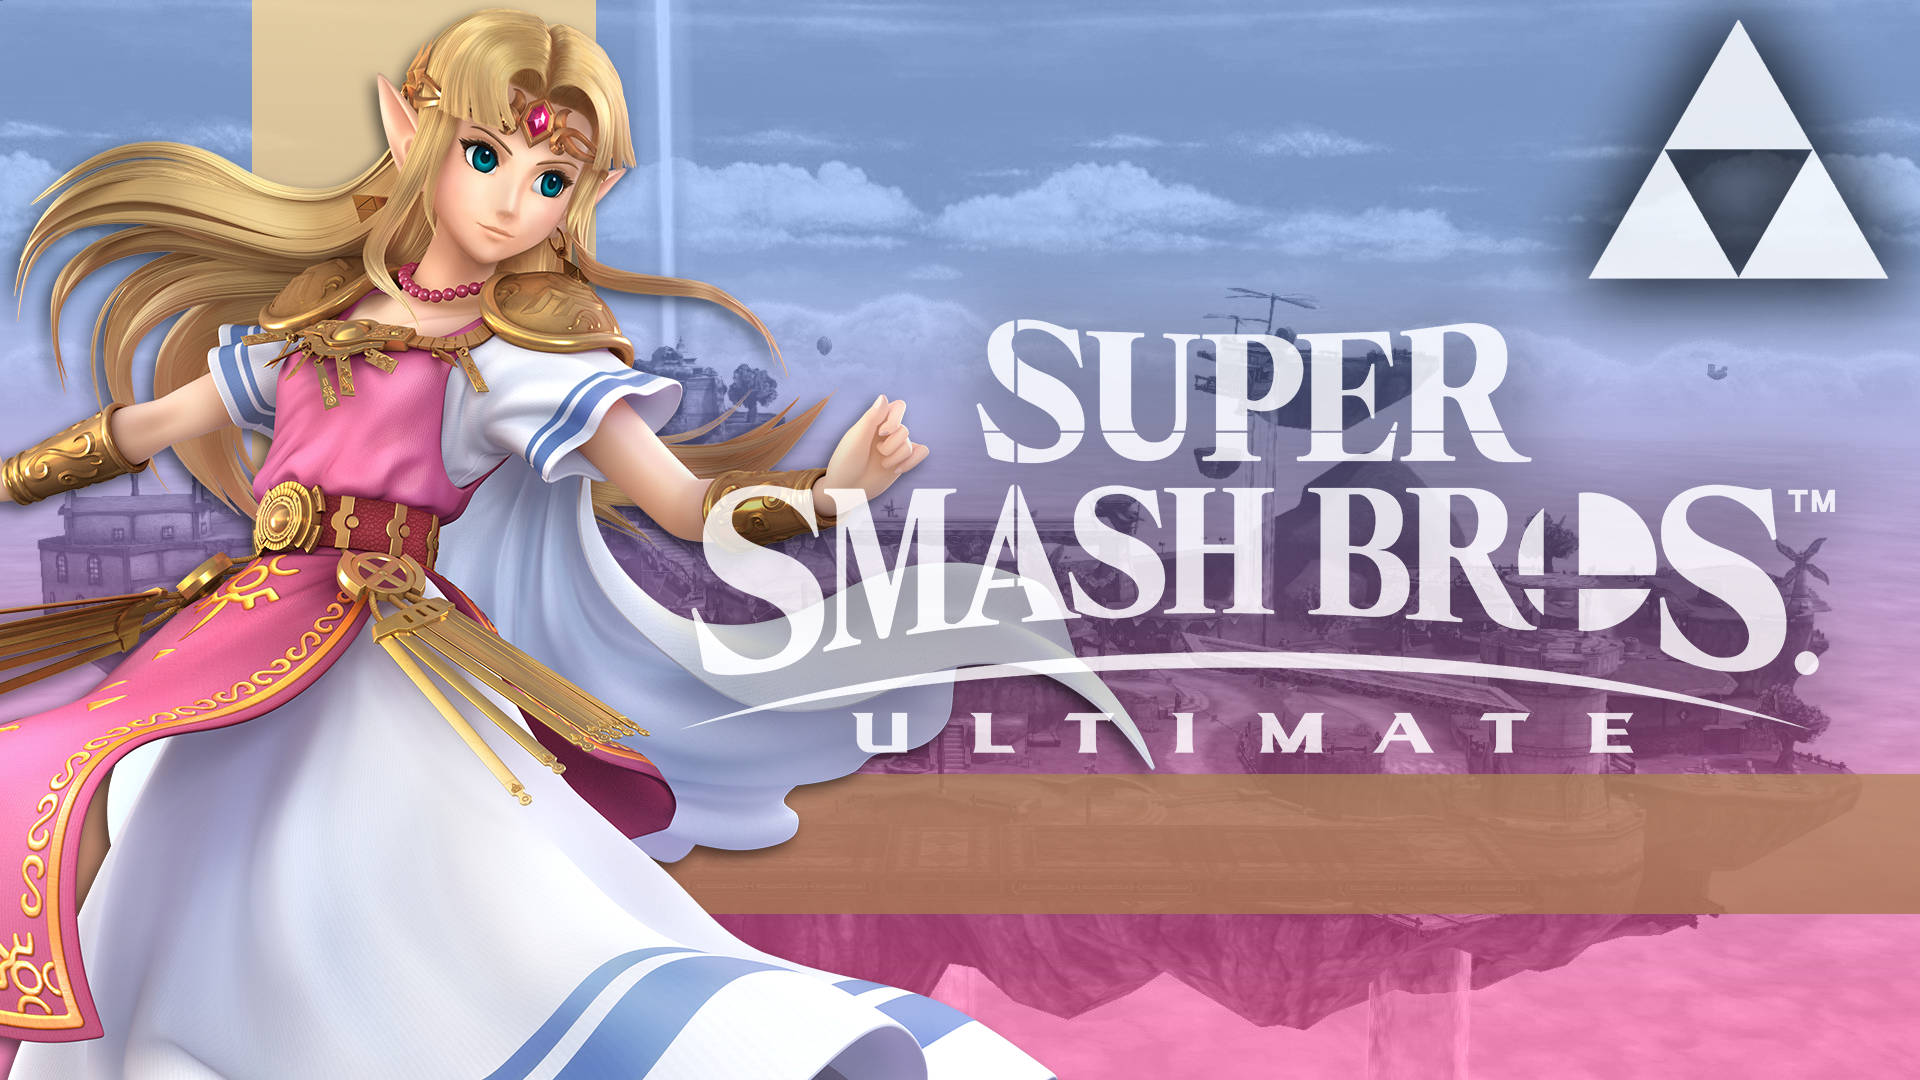 Super Smash Bros 1920X1080 Wallpaper and Background Image